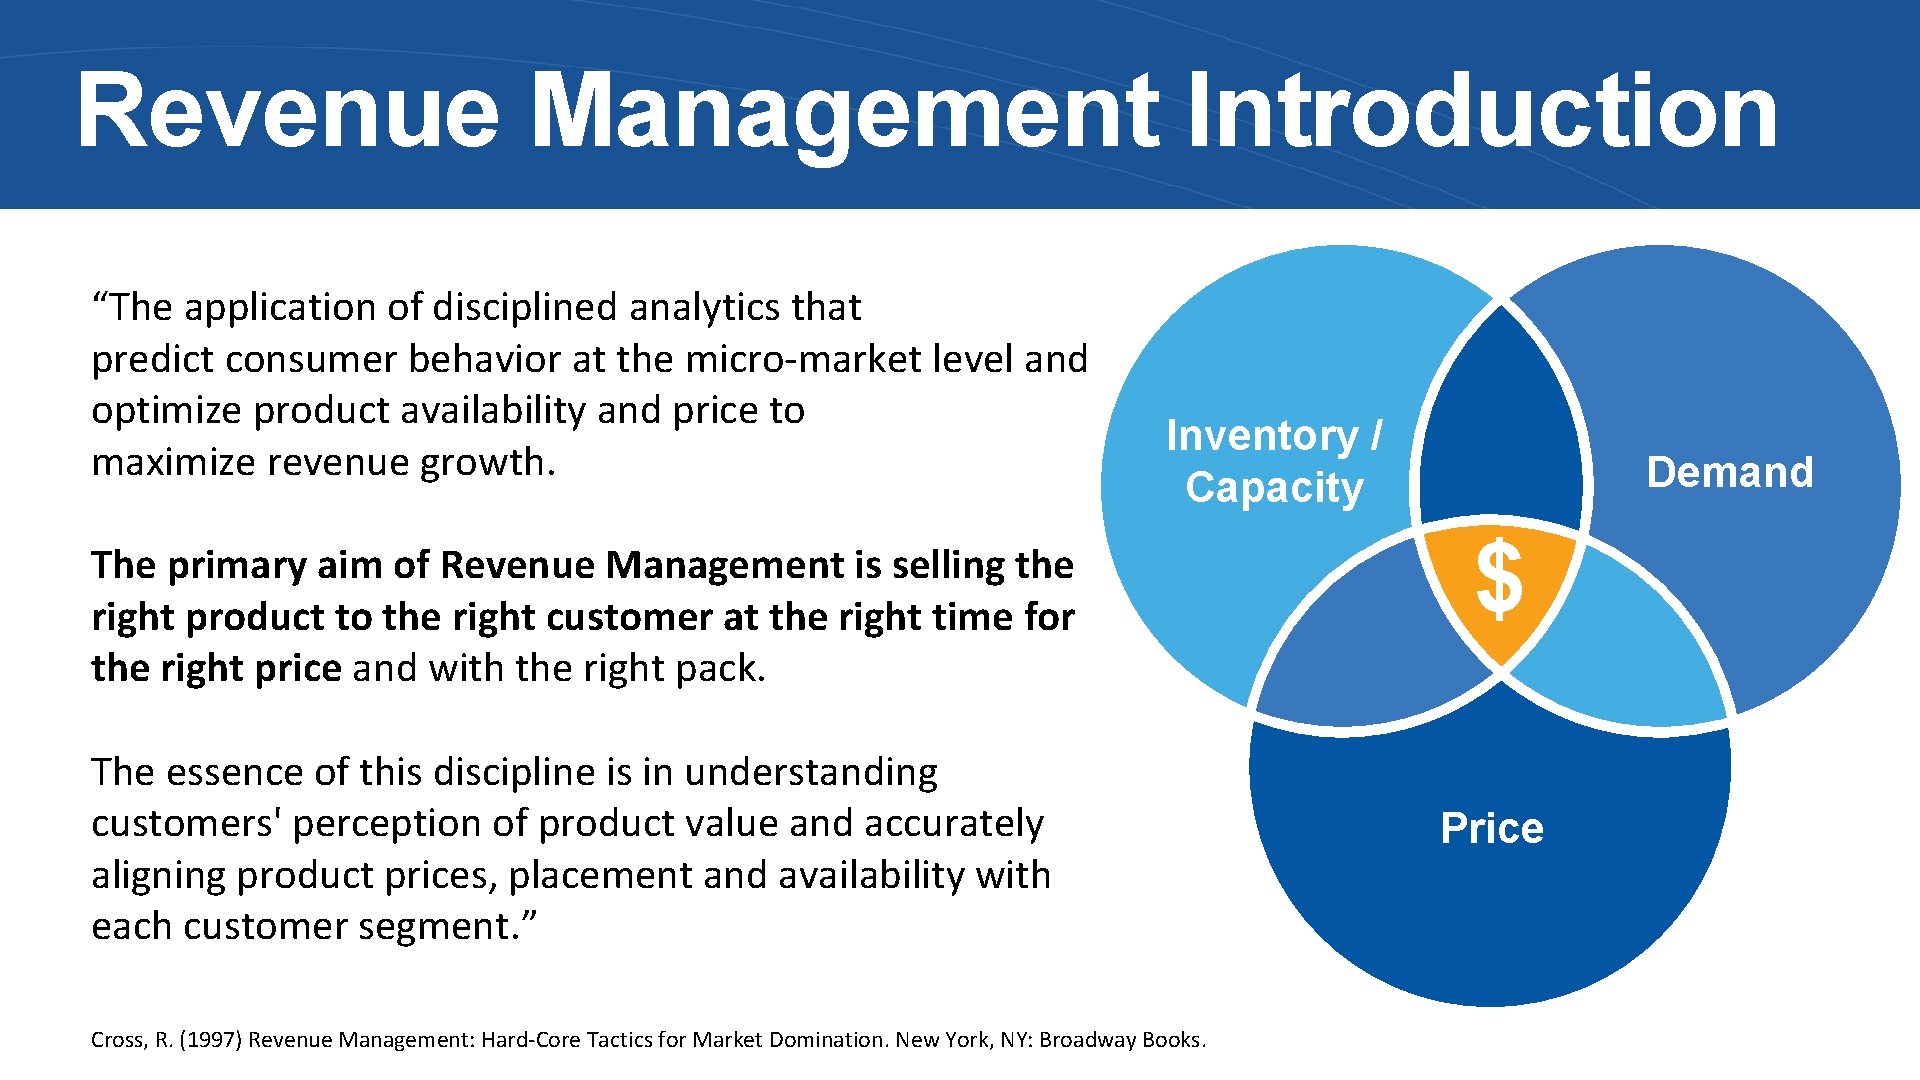 Revenue Management Introduction “The application of disciplined analytics that predict consumer behavior at the